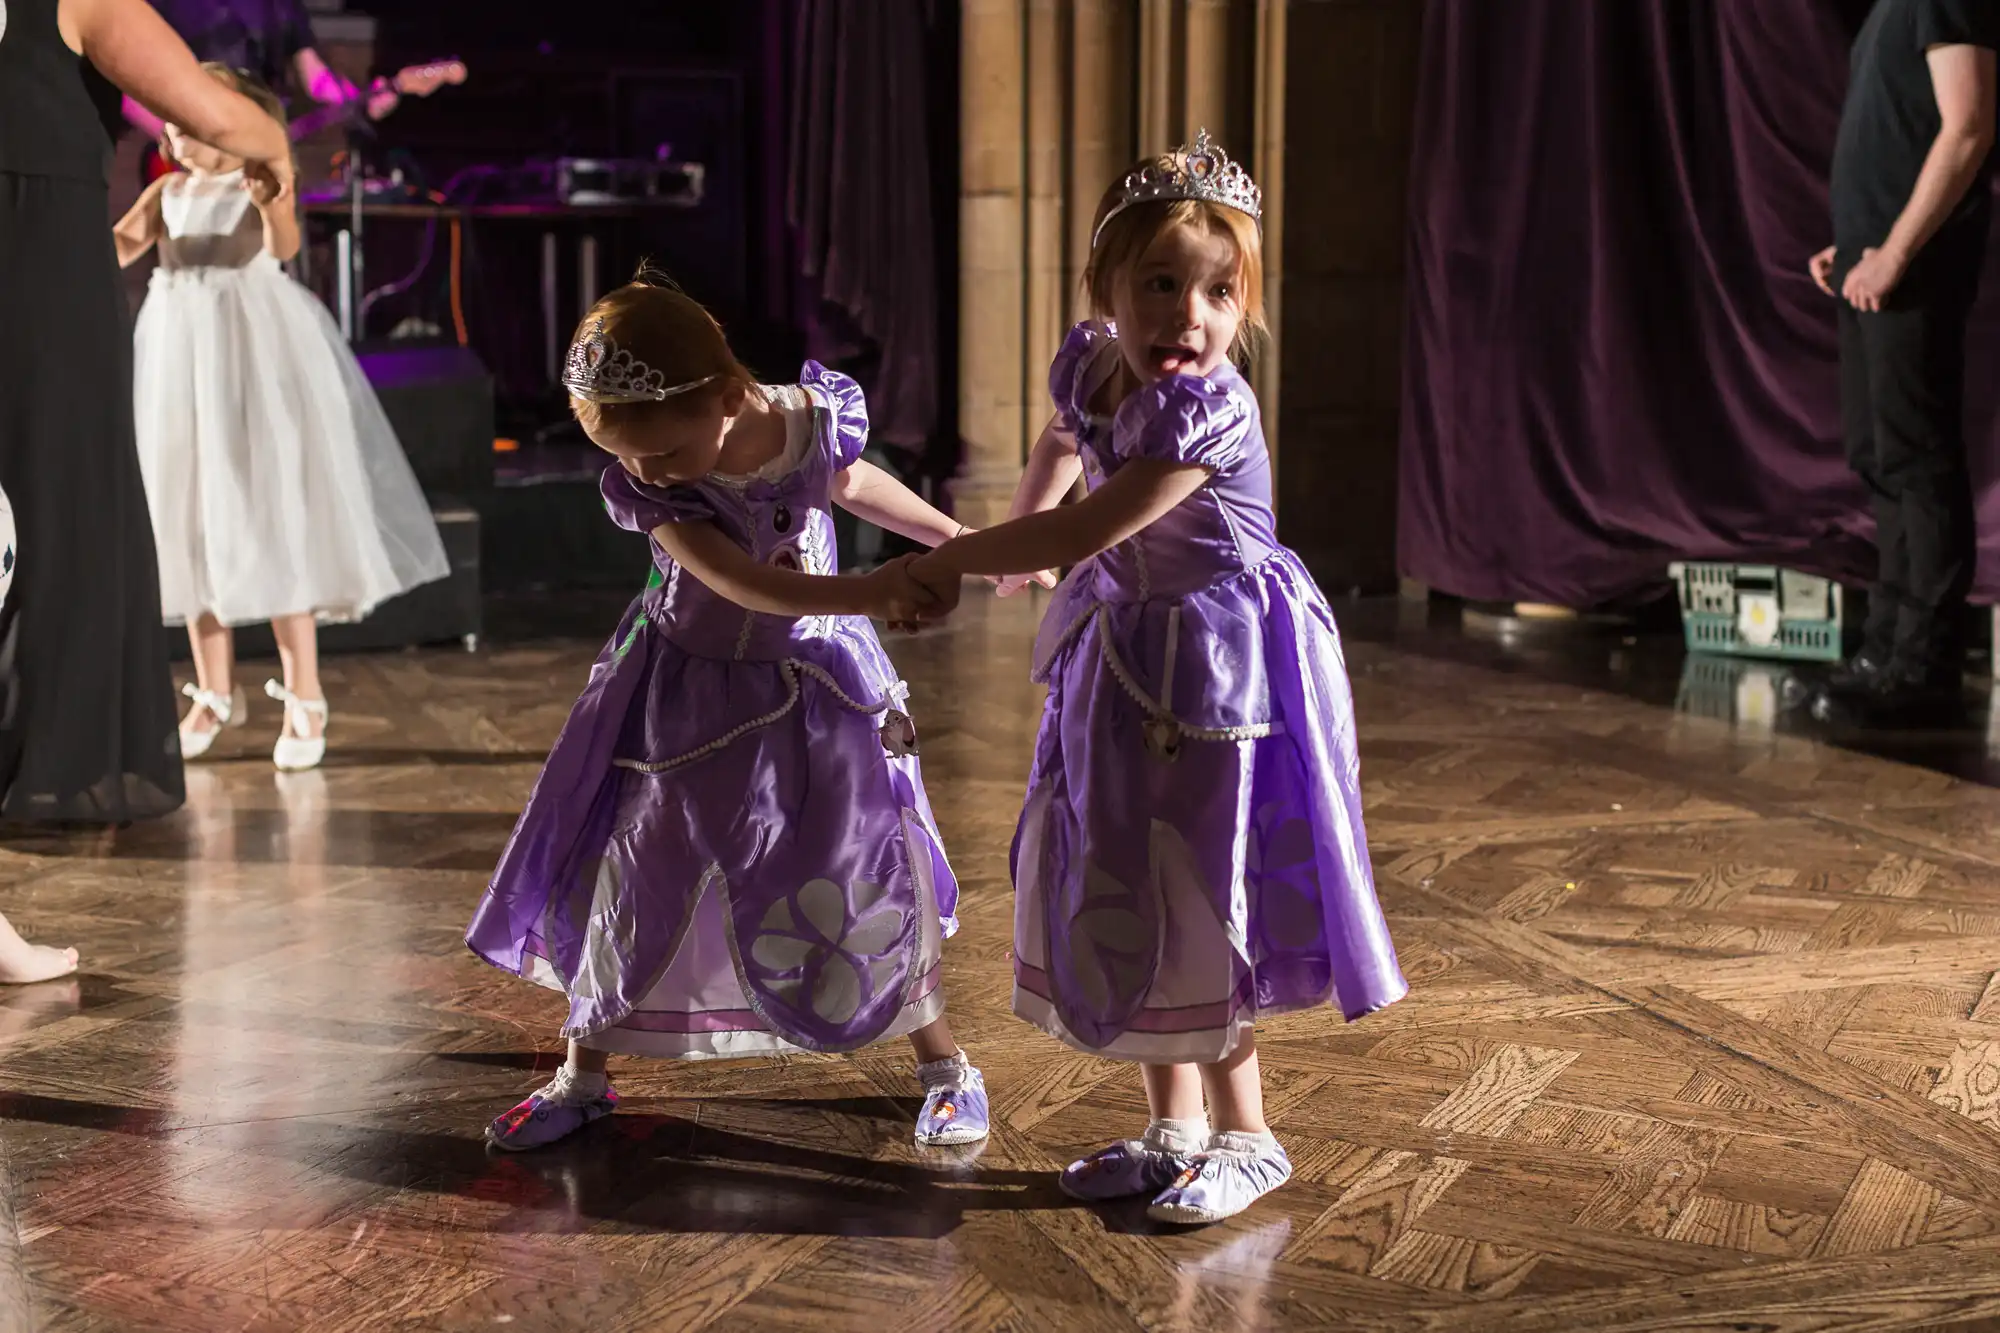 Two young girls dressed as princesses playfully dance on a wooden floor at a formal event, wearing tiaras and purple dresses.